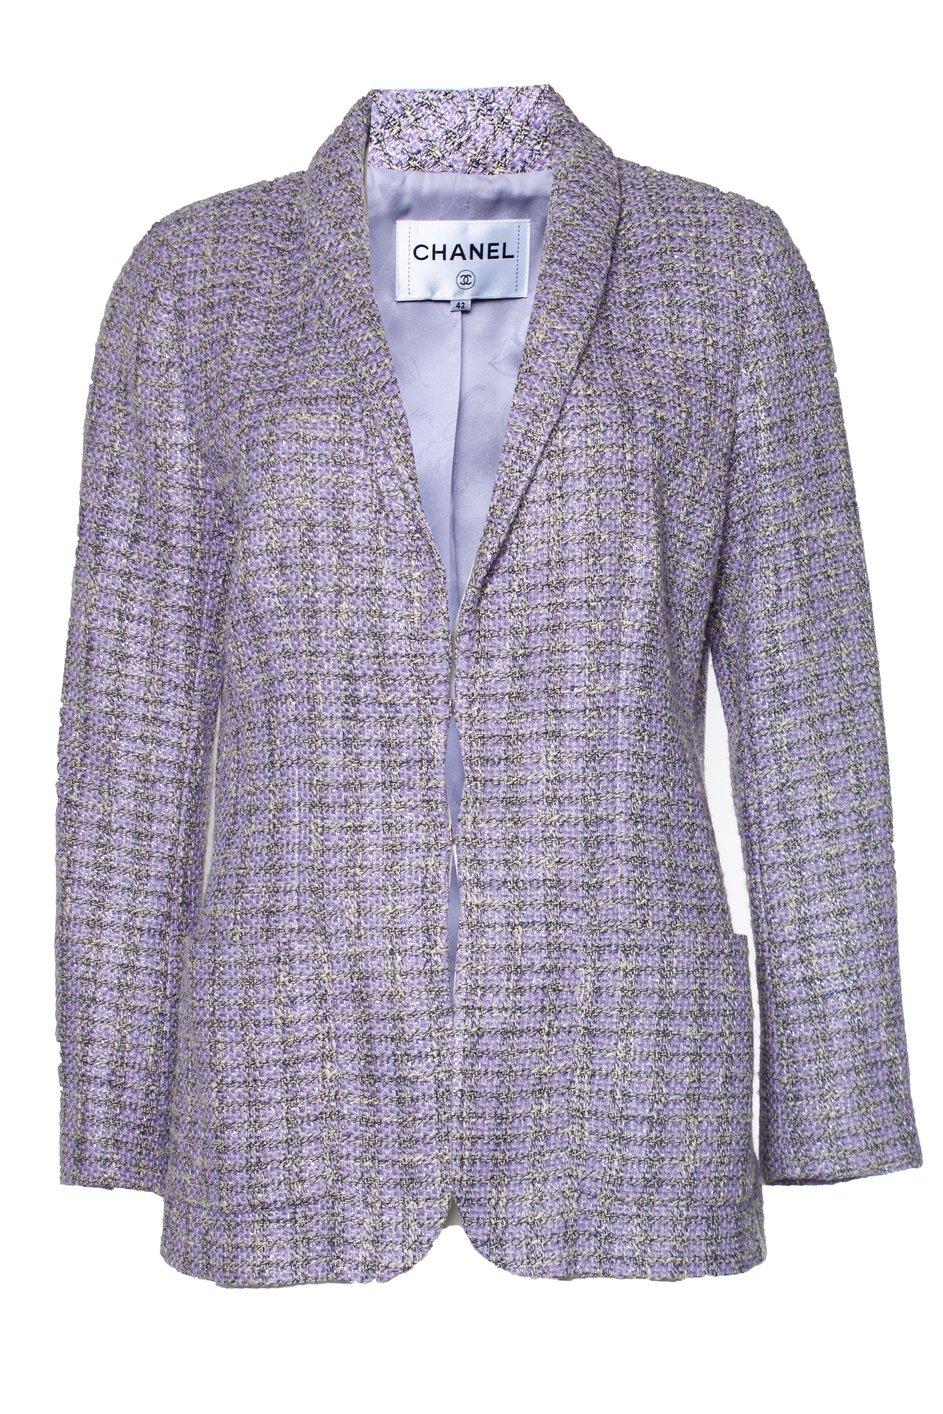 Charming Chanel lavender tweed jacket with CC logo silver-tone buttons from AIRPORT Colletion
Size mark 42 FR. Condition is pristine.